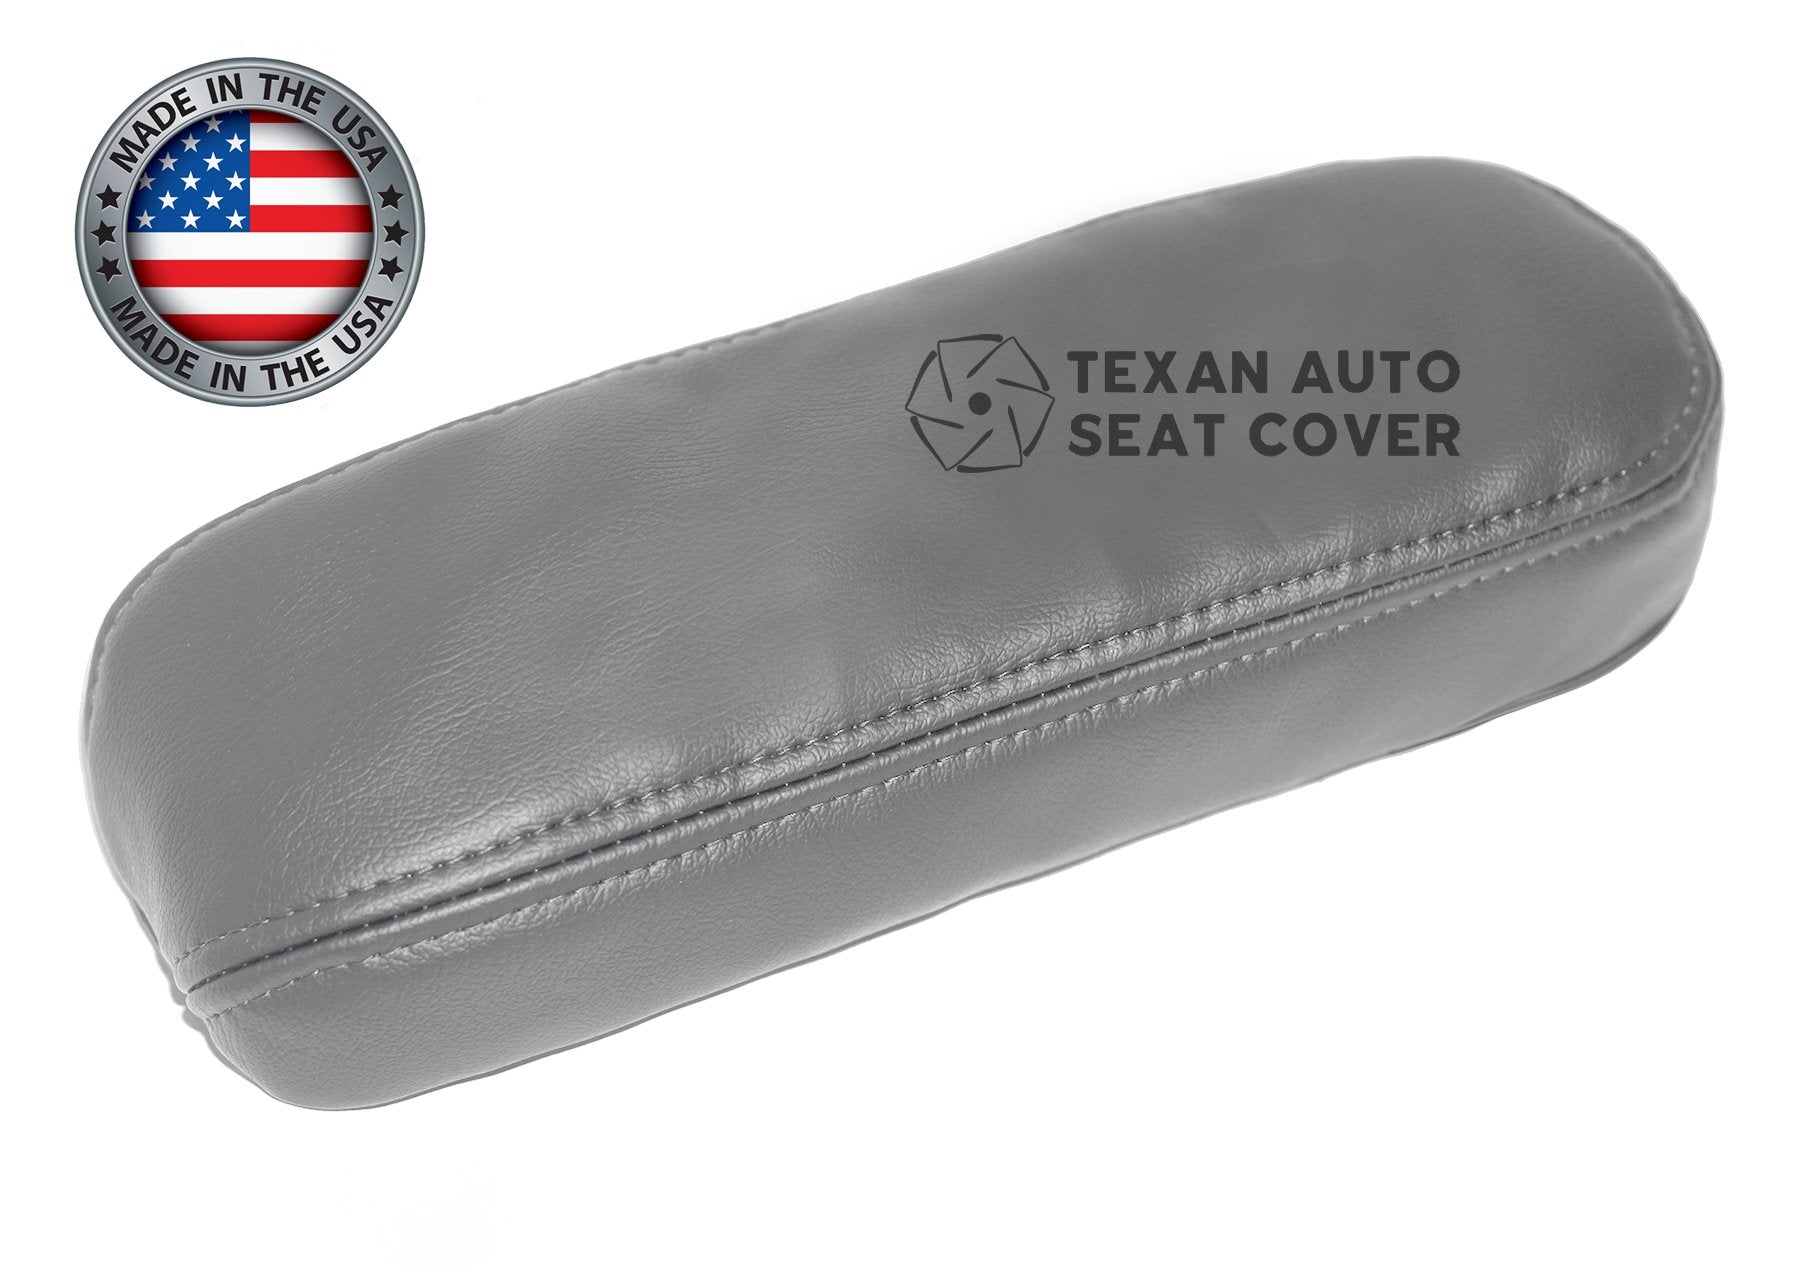 1999, 2000, 2001 Ford F150 Lariat Passenger Side Armrest Synthetic Leather Replacement Cover Gray